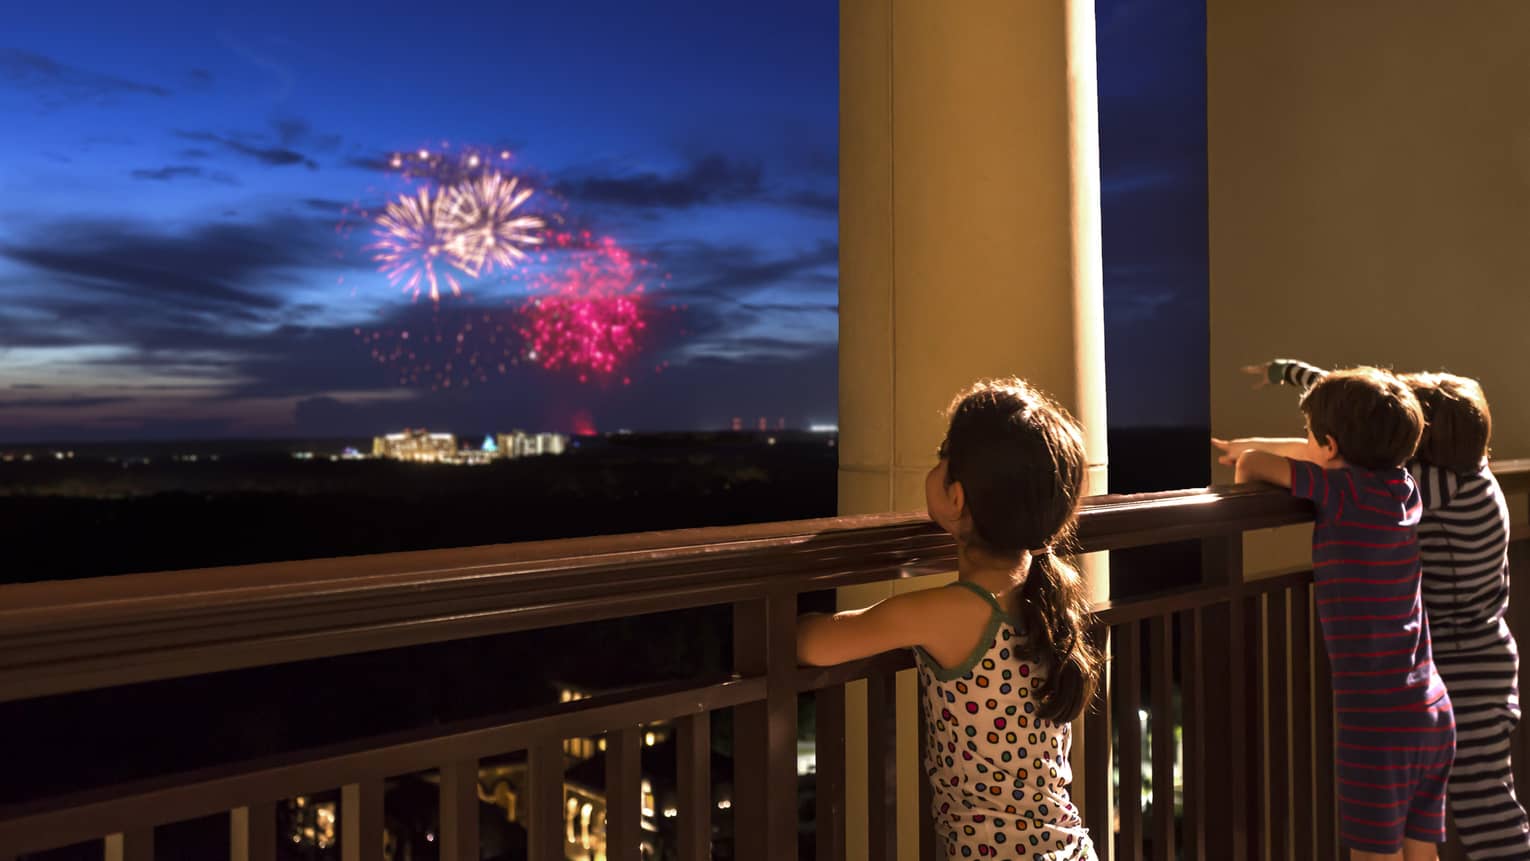 Young girl stands on Four Seasons Hotel balcony, watches colourful fireworks display over Walt Disney World resort